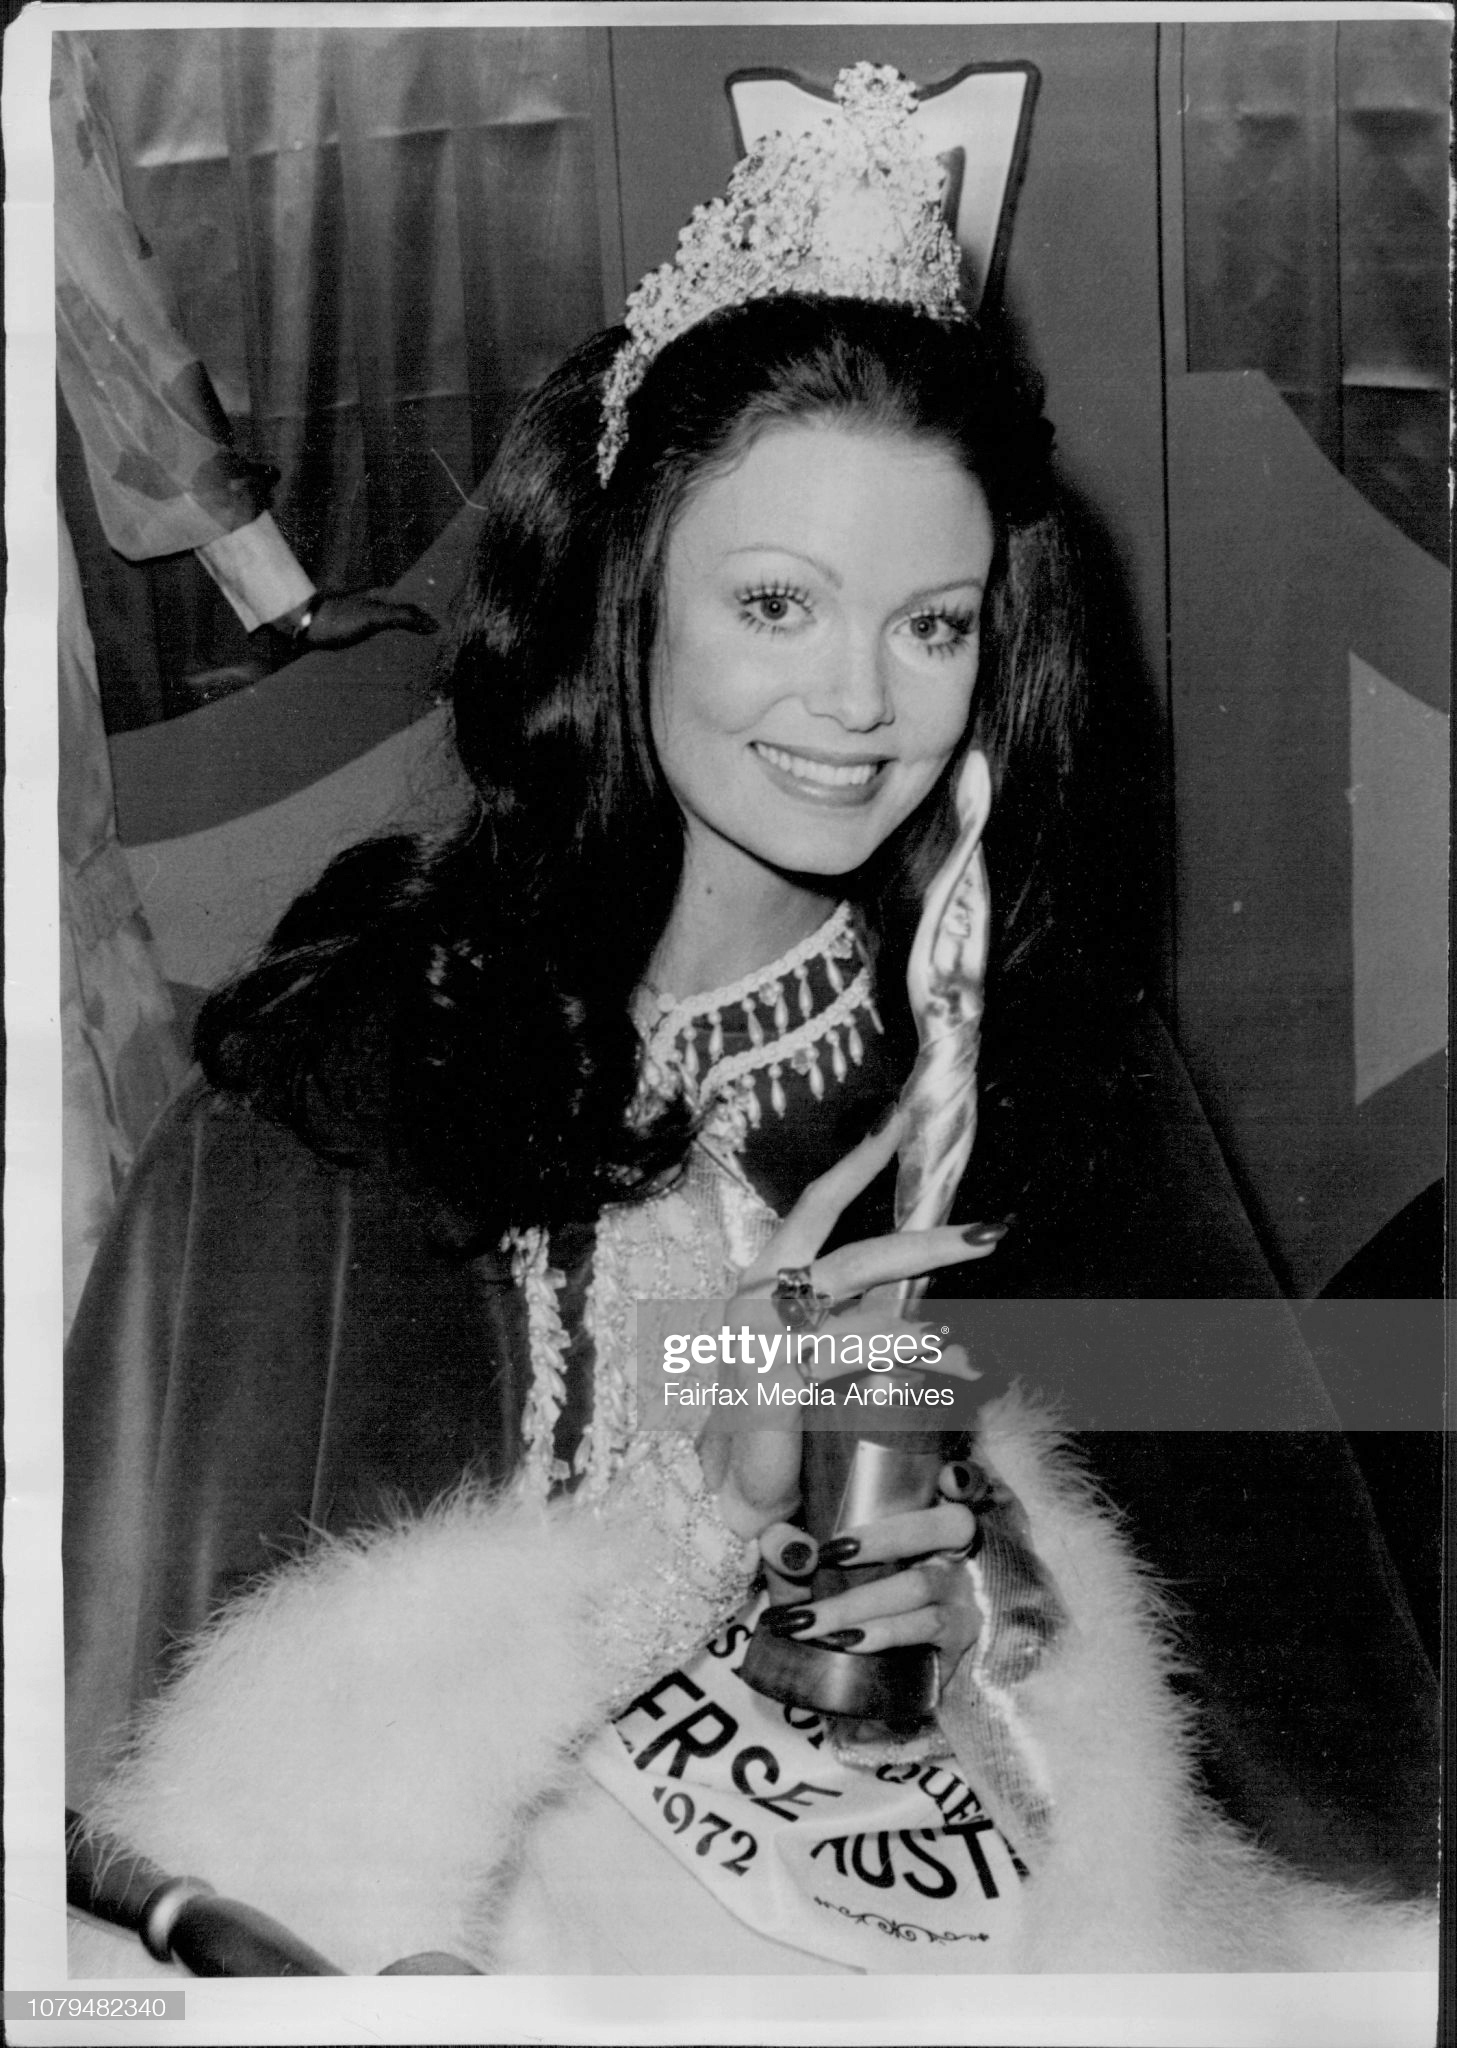 kerry anne wells, miss universe 1972. 25792918